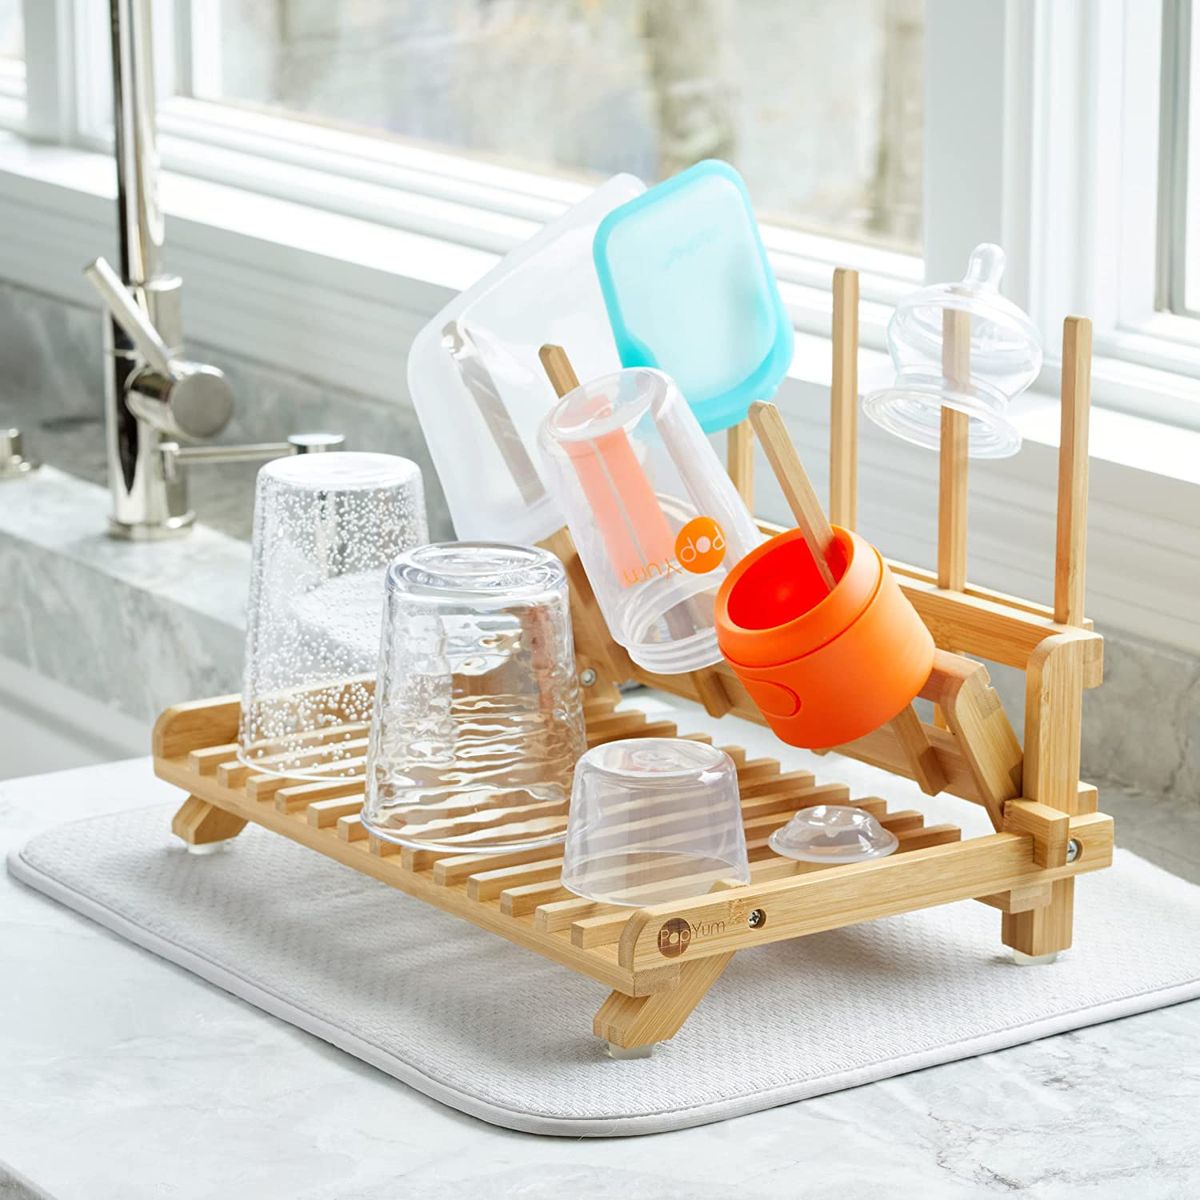 Bamboo Dish Racks Are The Cleanup Solution You Need!